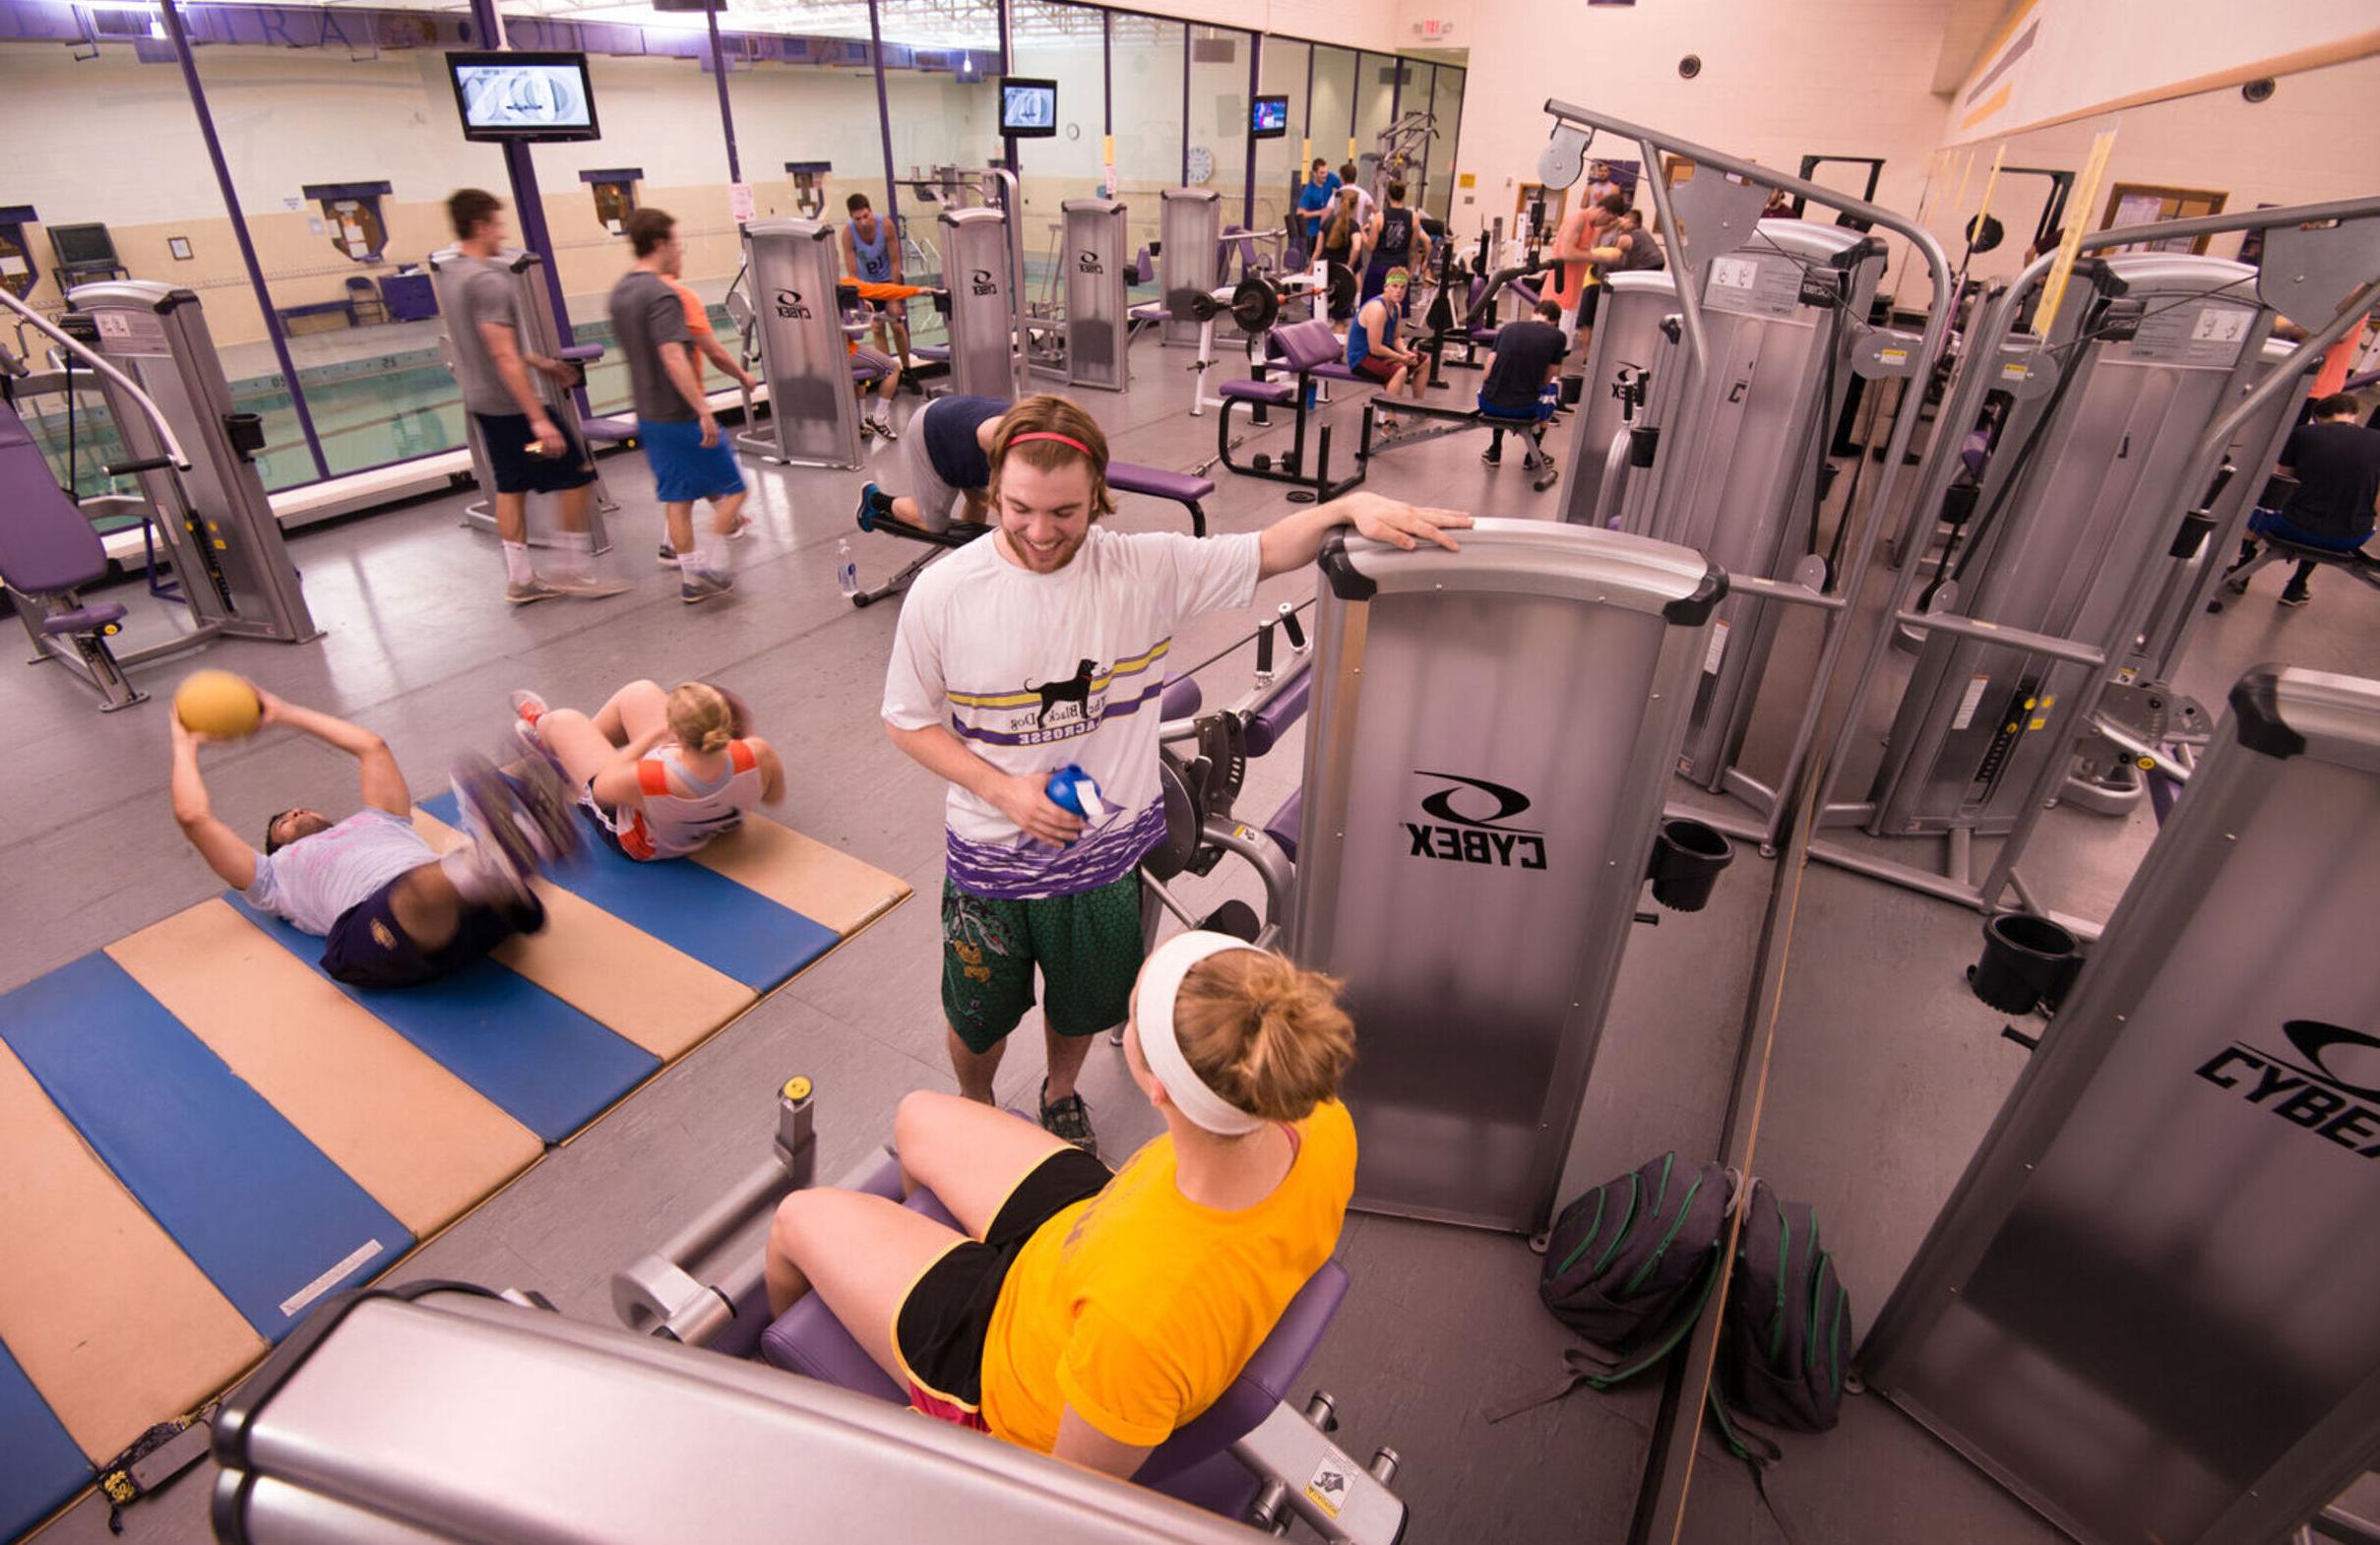 Students work out in the fitness center